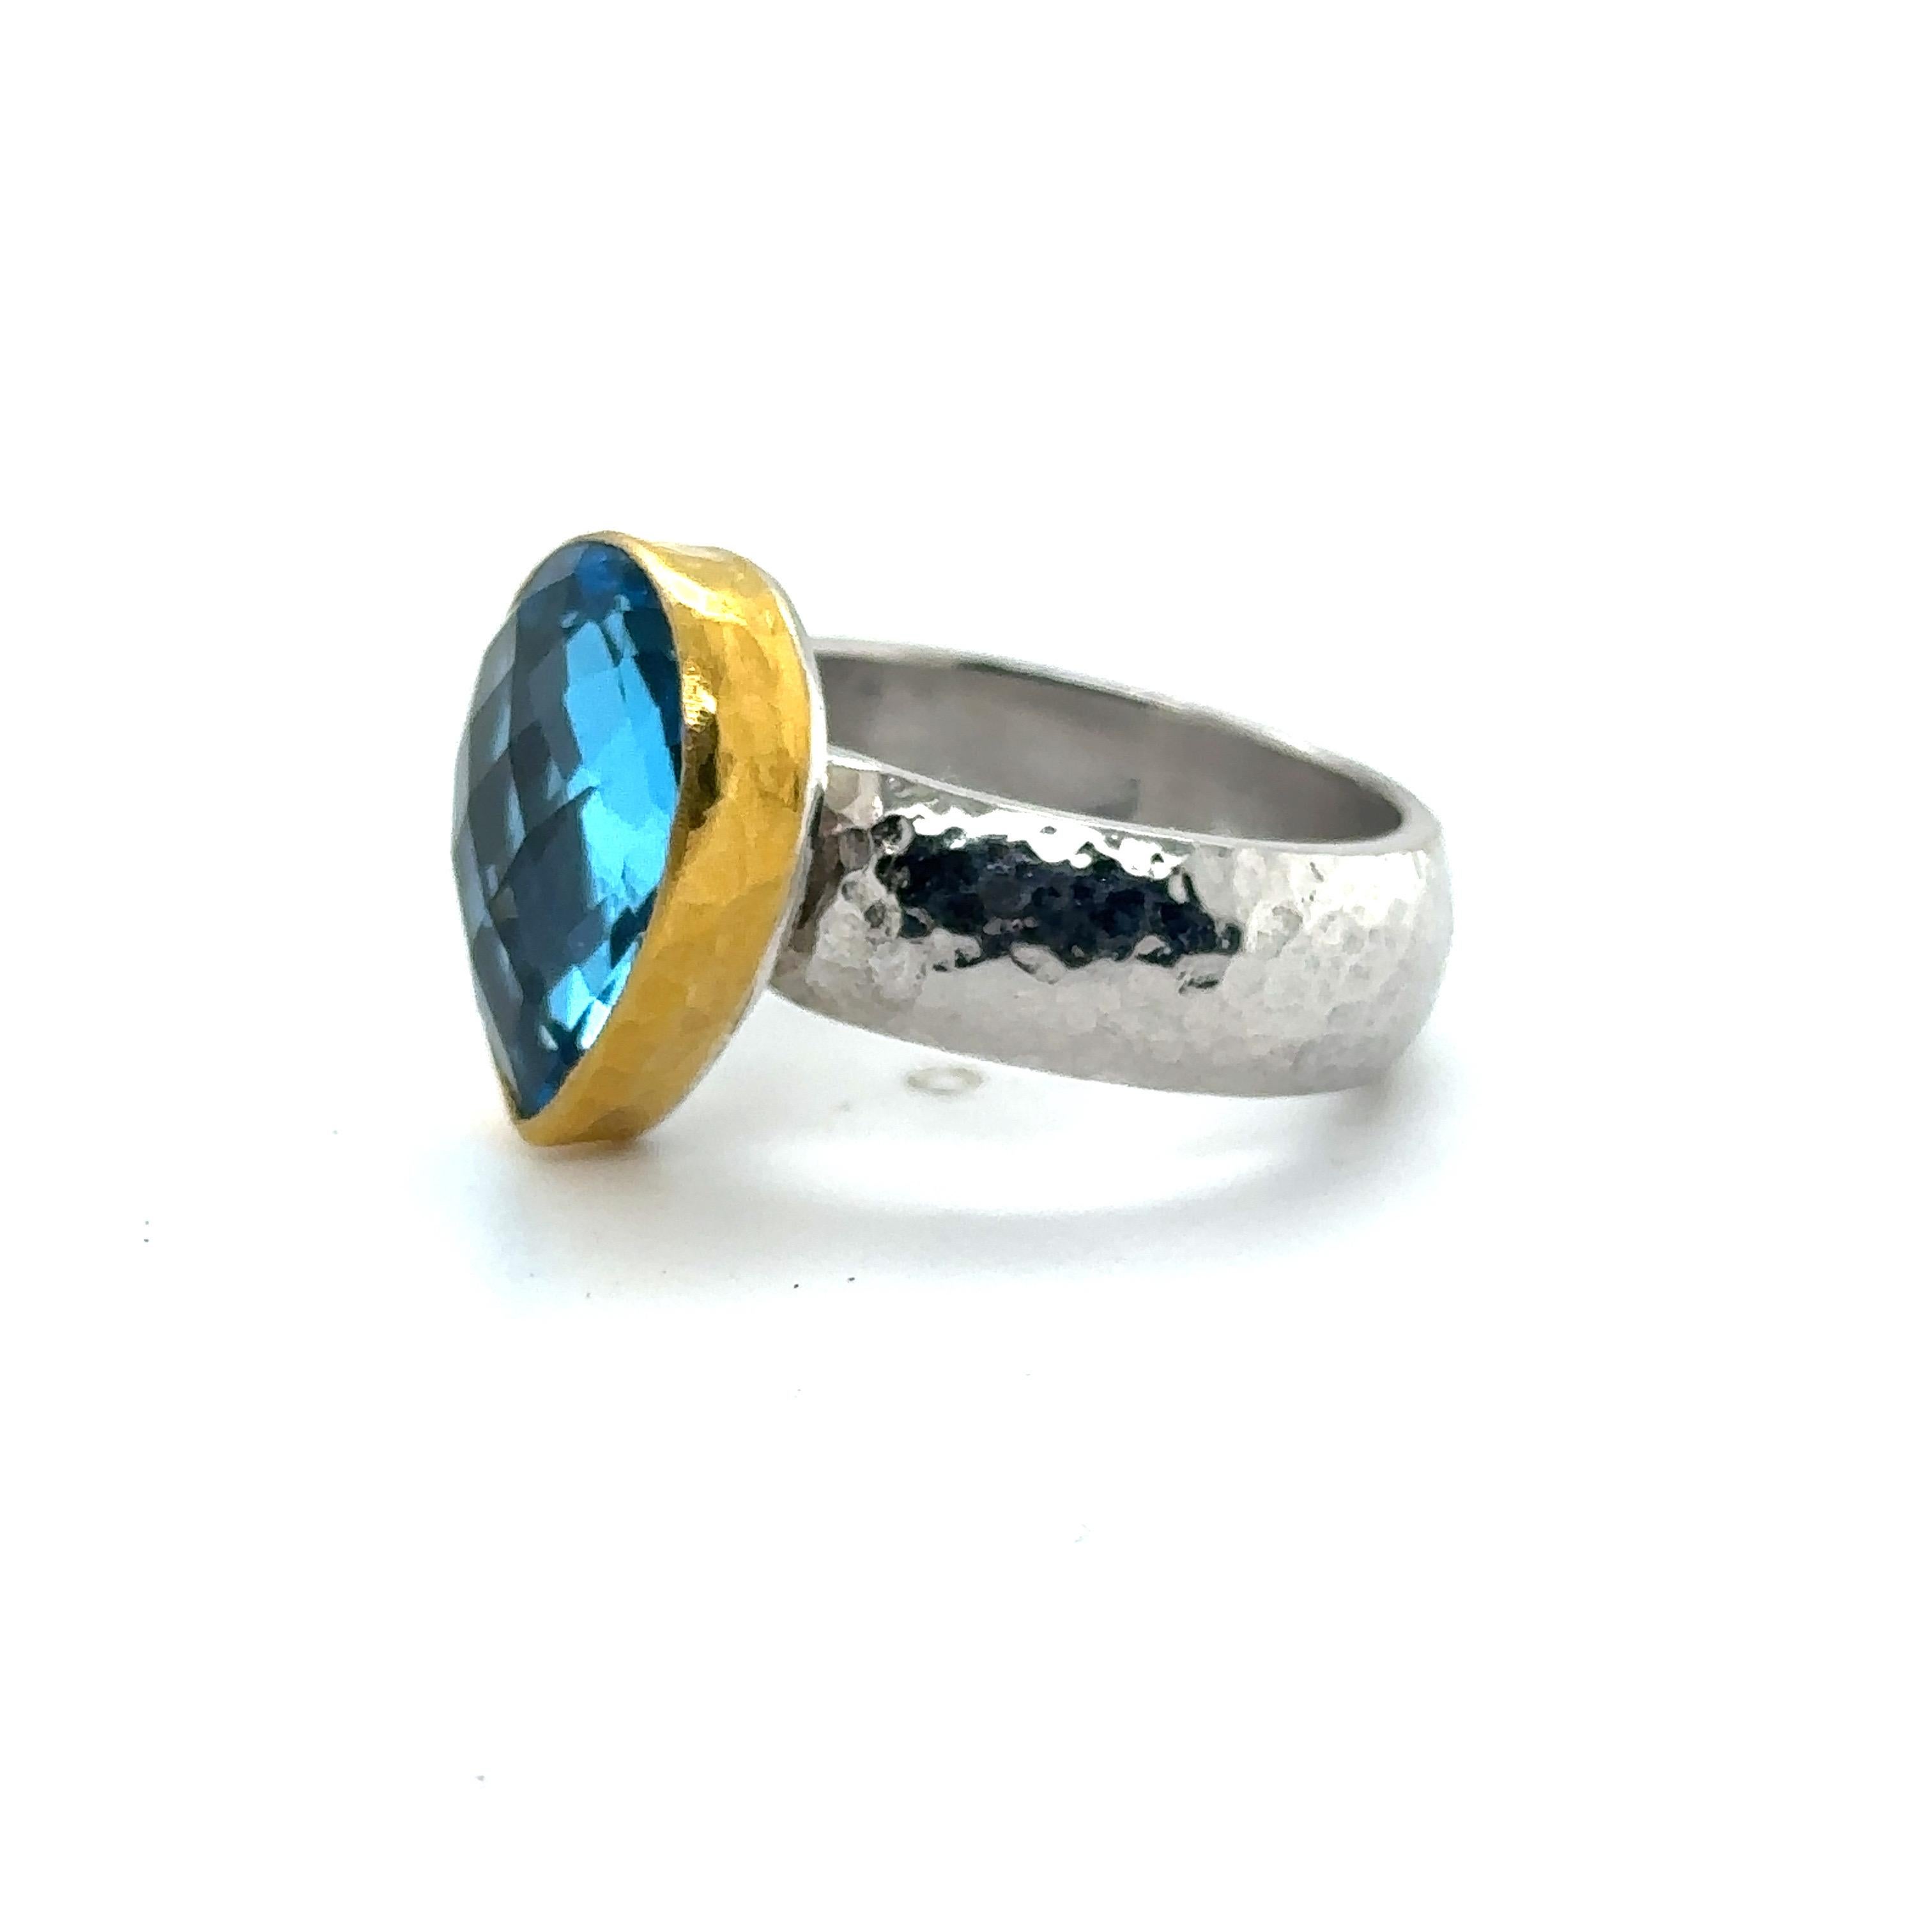 JAS-19-1918 - 24KT GOLD/SS RING with PEAR SHAPE SWISS BLUE TOPAZ For Sale 2